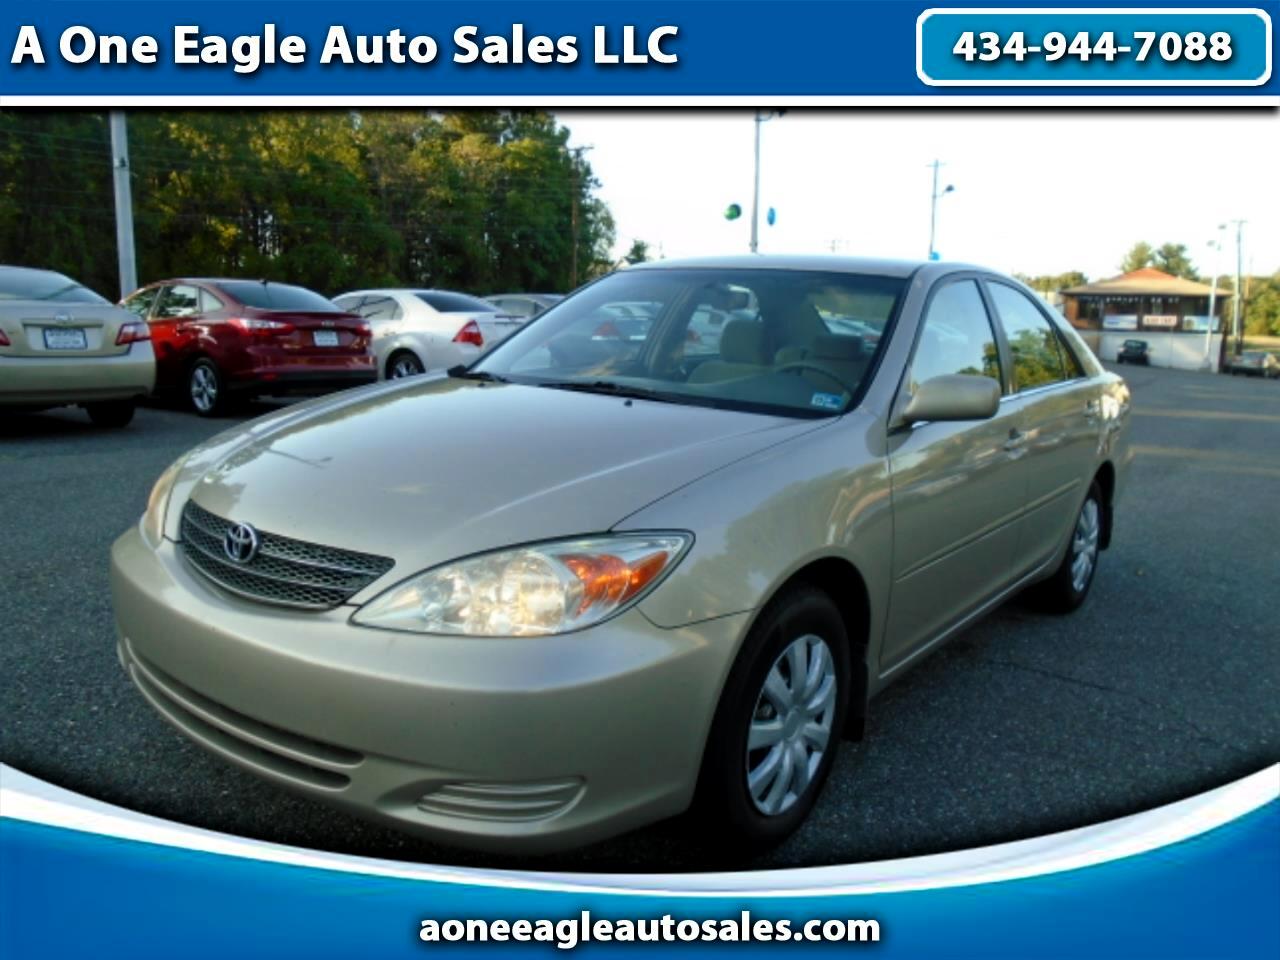 Used 2004 Toyota Camry Le For Sale In Lynchburg Va 24572 A